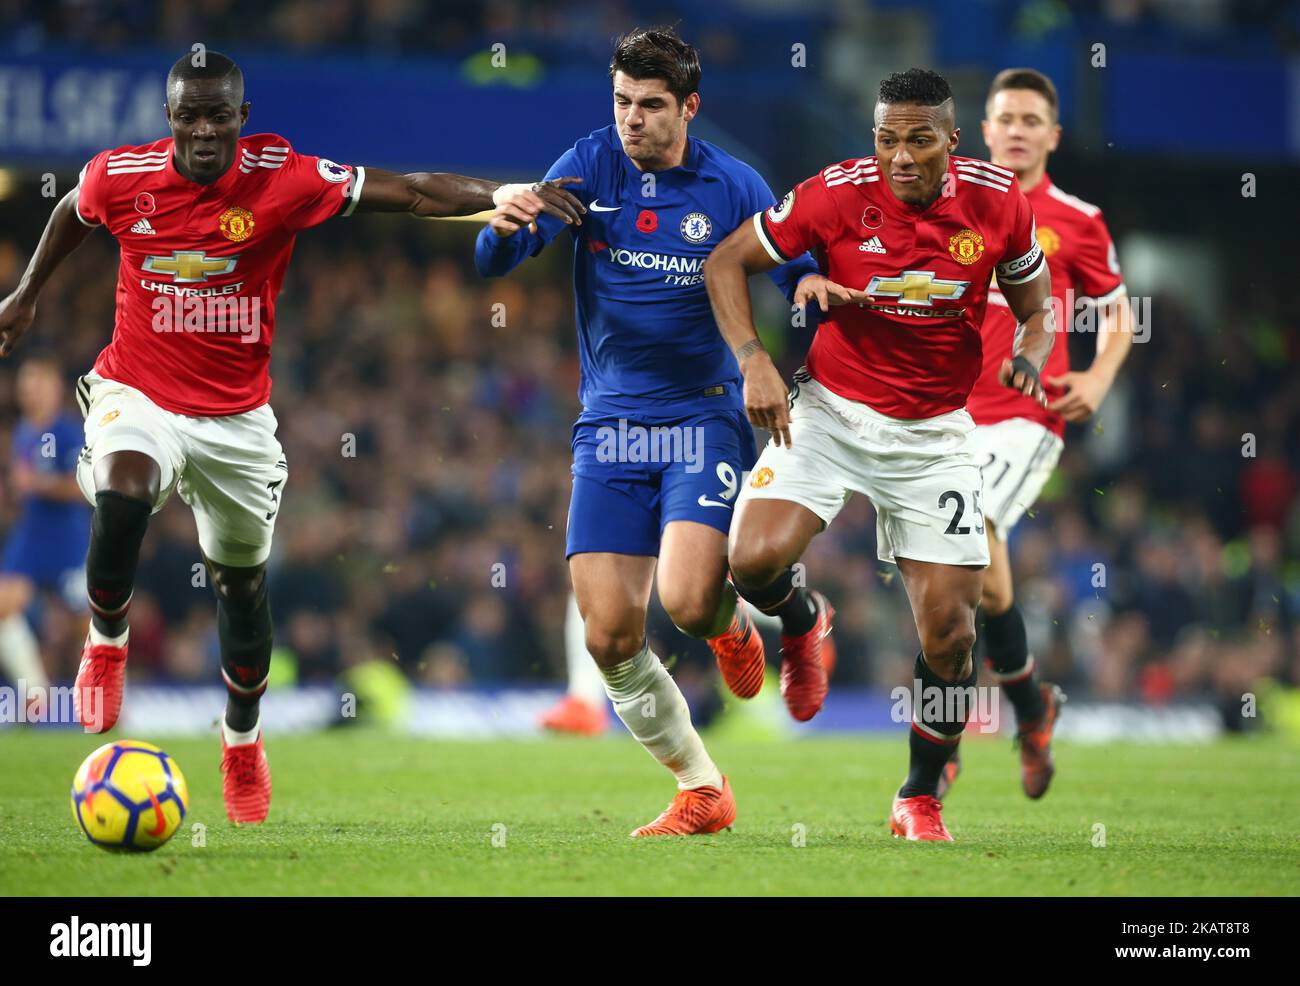 L-R Manchester United's Eric Bailly, Chelsea's Alvaro Morata and Manchester United's Luis Antonio Valencia during the Premier League match between Chelsea and Manchester United at Stamford Bridge in London, England on November 5, 2017. (Photo by Kieran Galvin/NurPhoto) Stock Photo